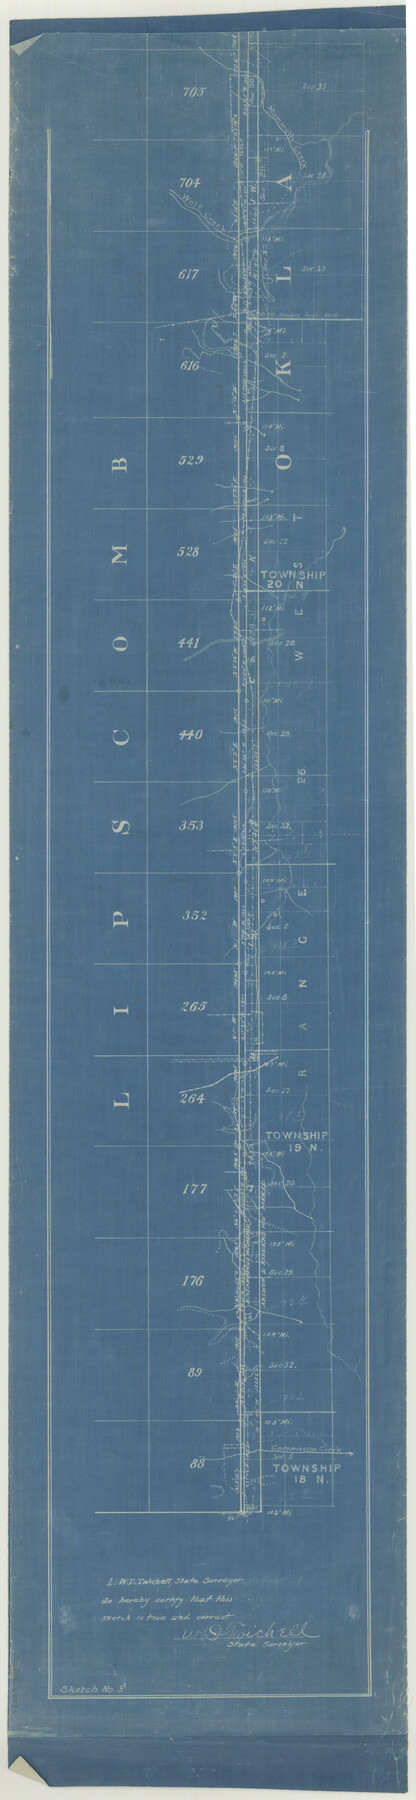 65381, Texas Panhandle East Boundary Line, General Map Collection